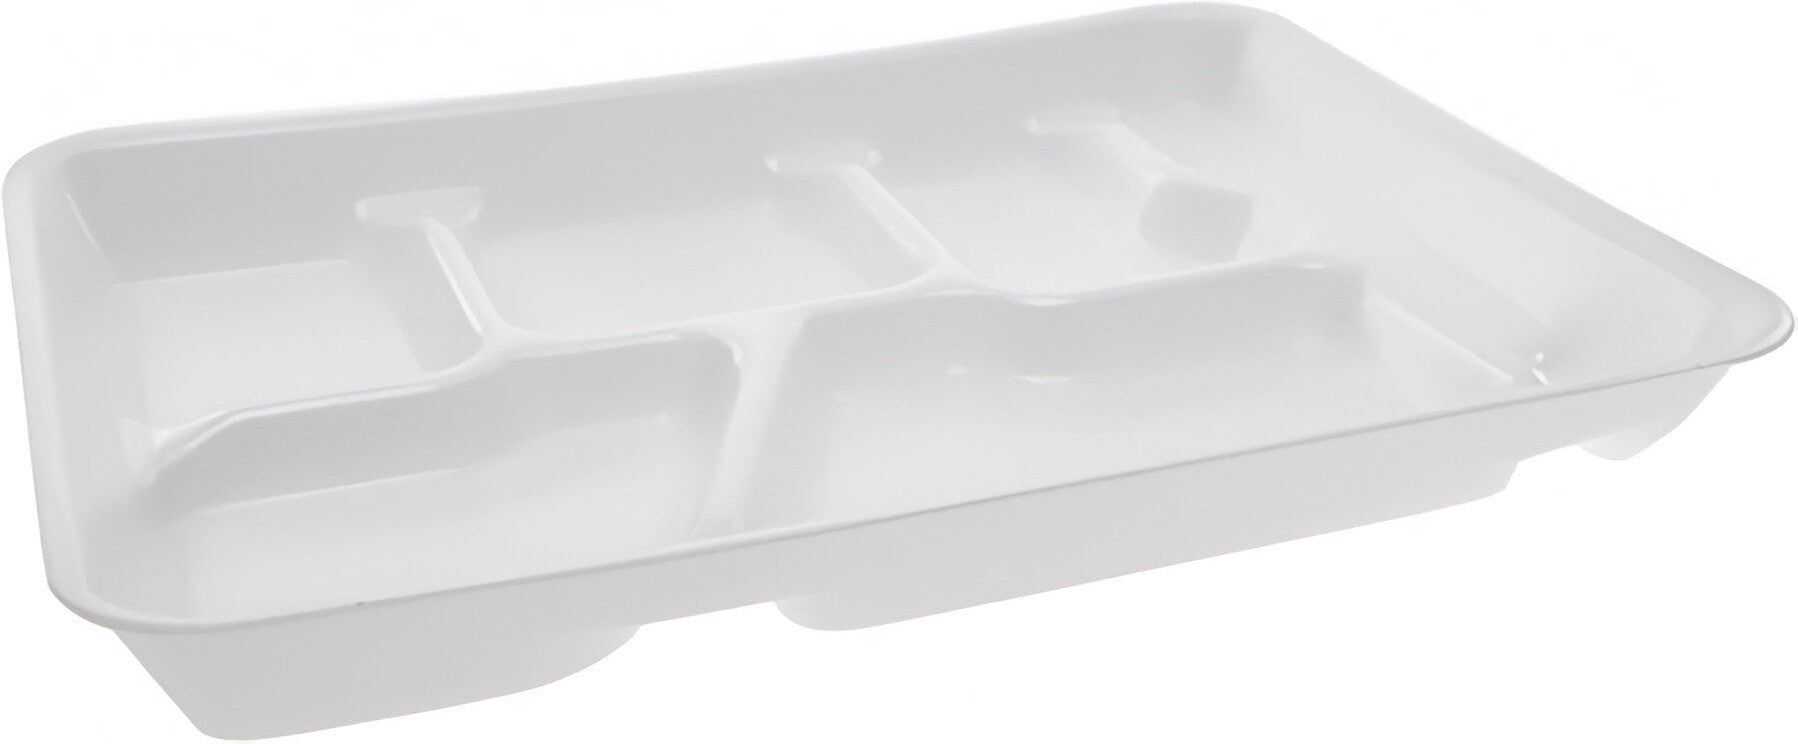 Pactiv Evergreen - 6 Compartment Foam Lunch Tray/Plates, 500/Cs - 0TH10601SGBX